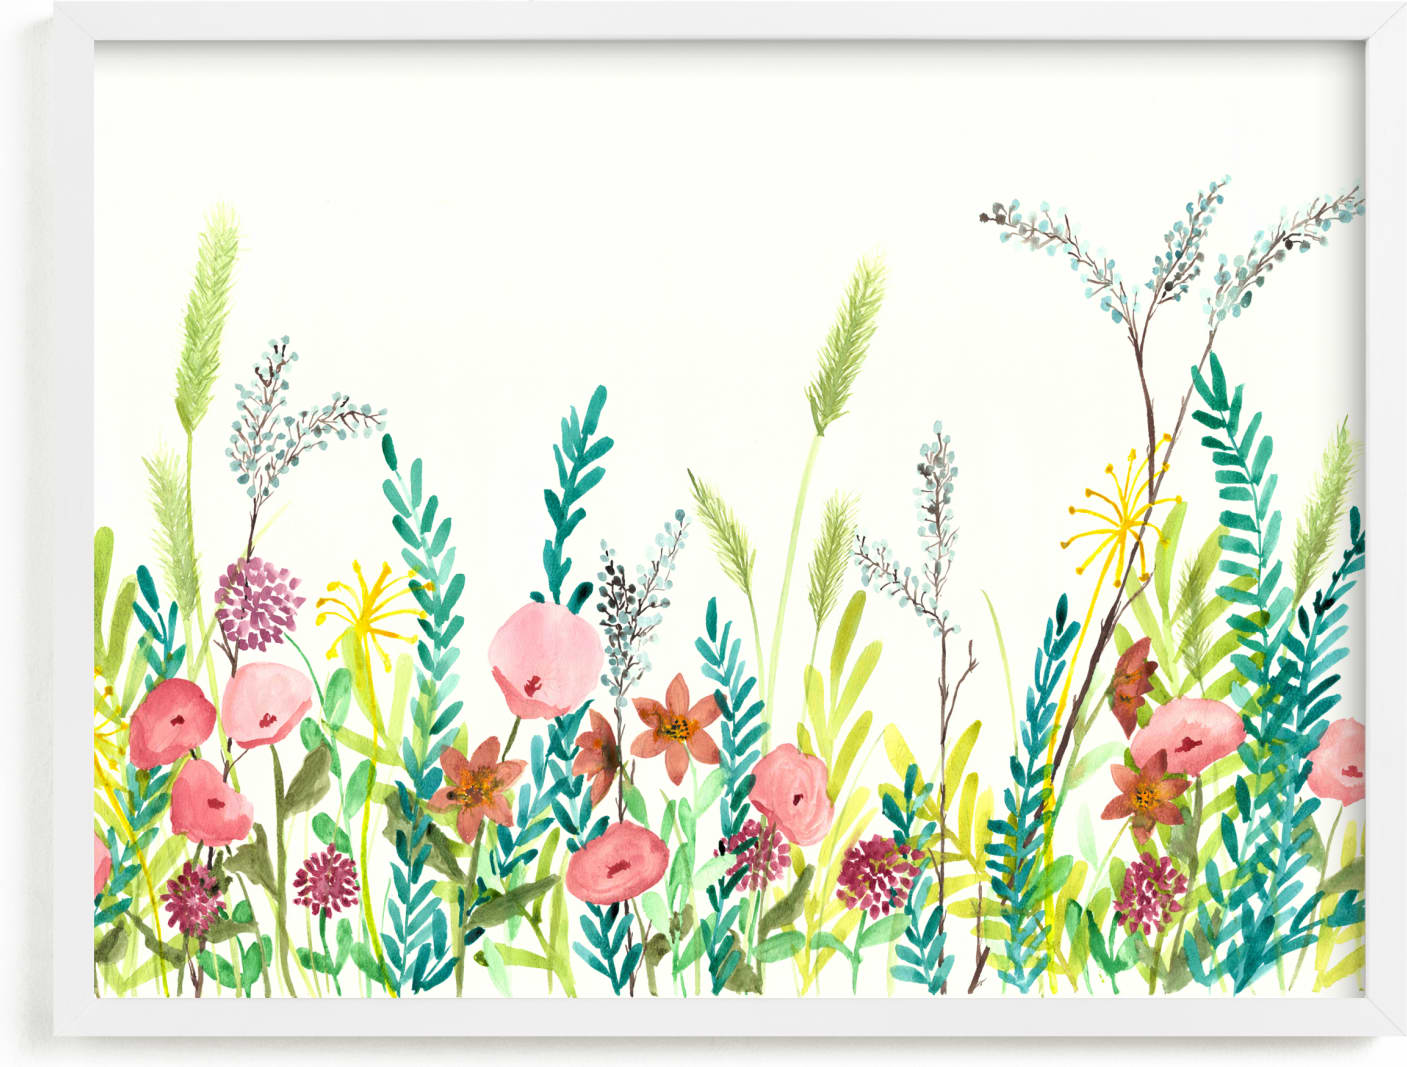 This is a colorful kids wall art by Lizzie Bowman called Wildflower and Free.